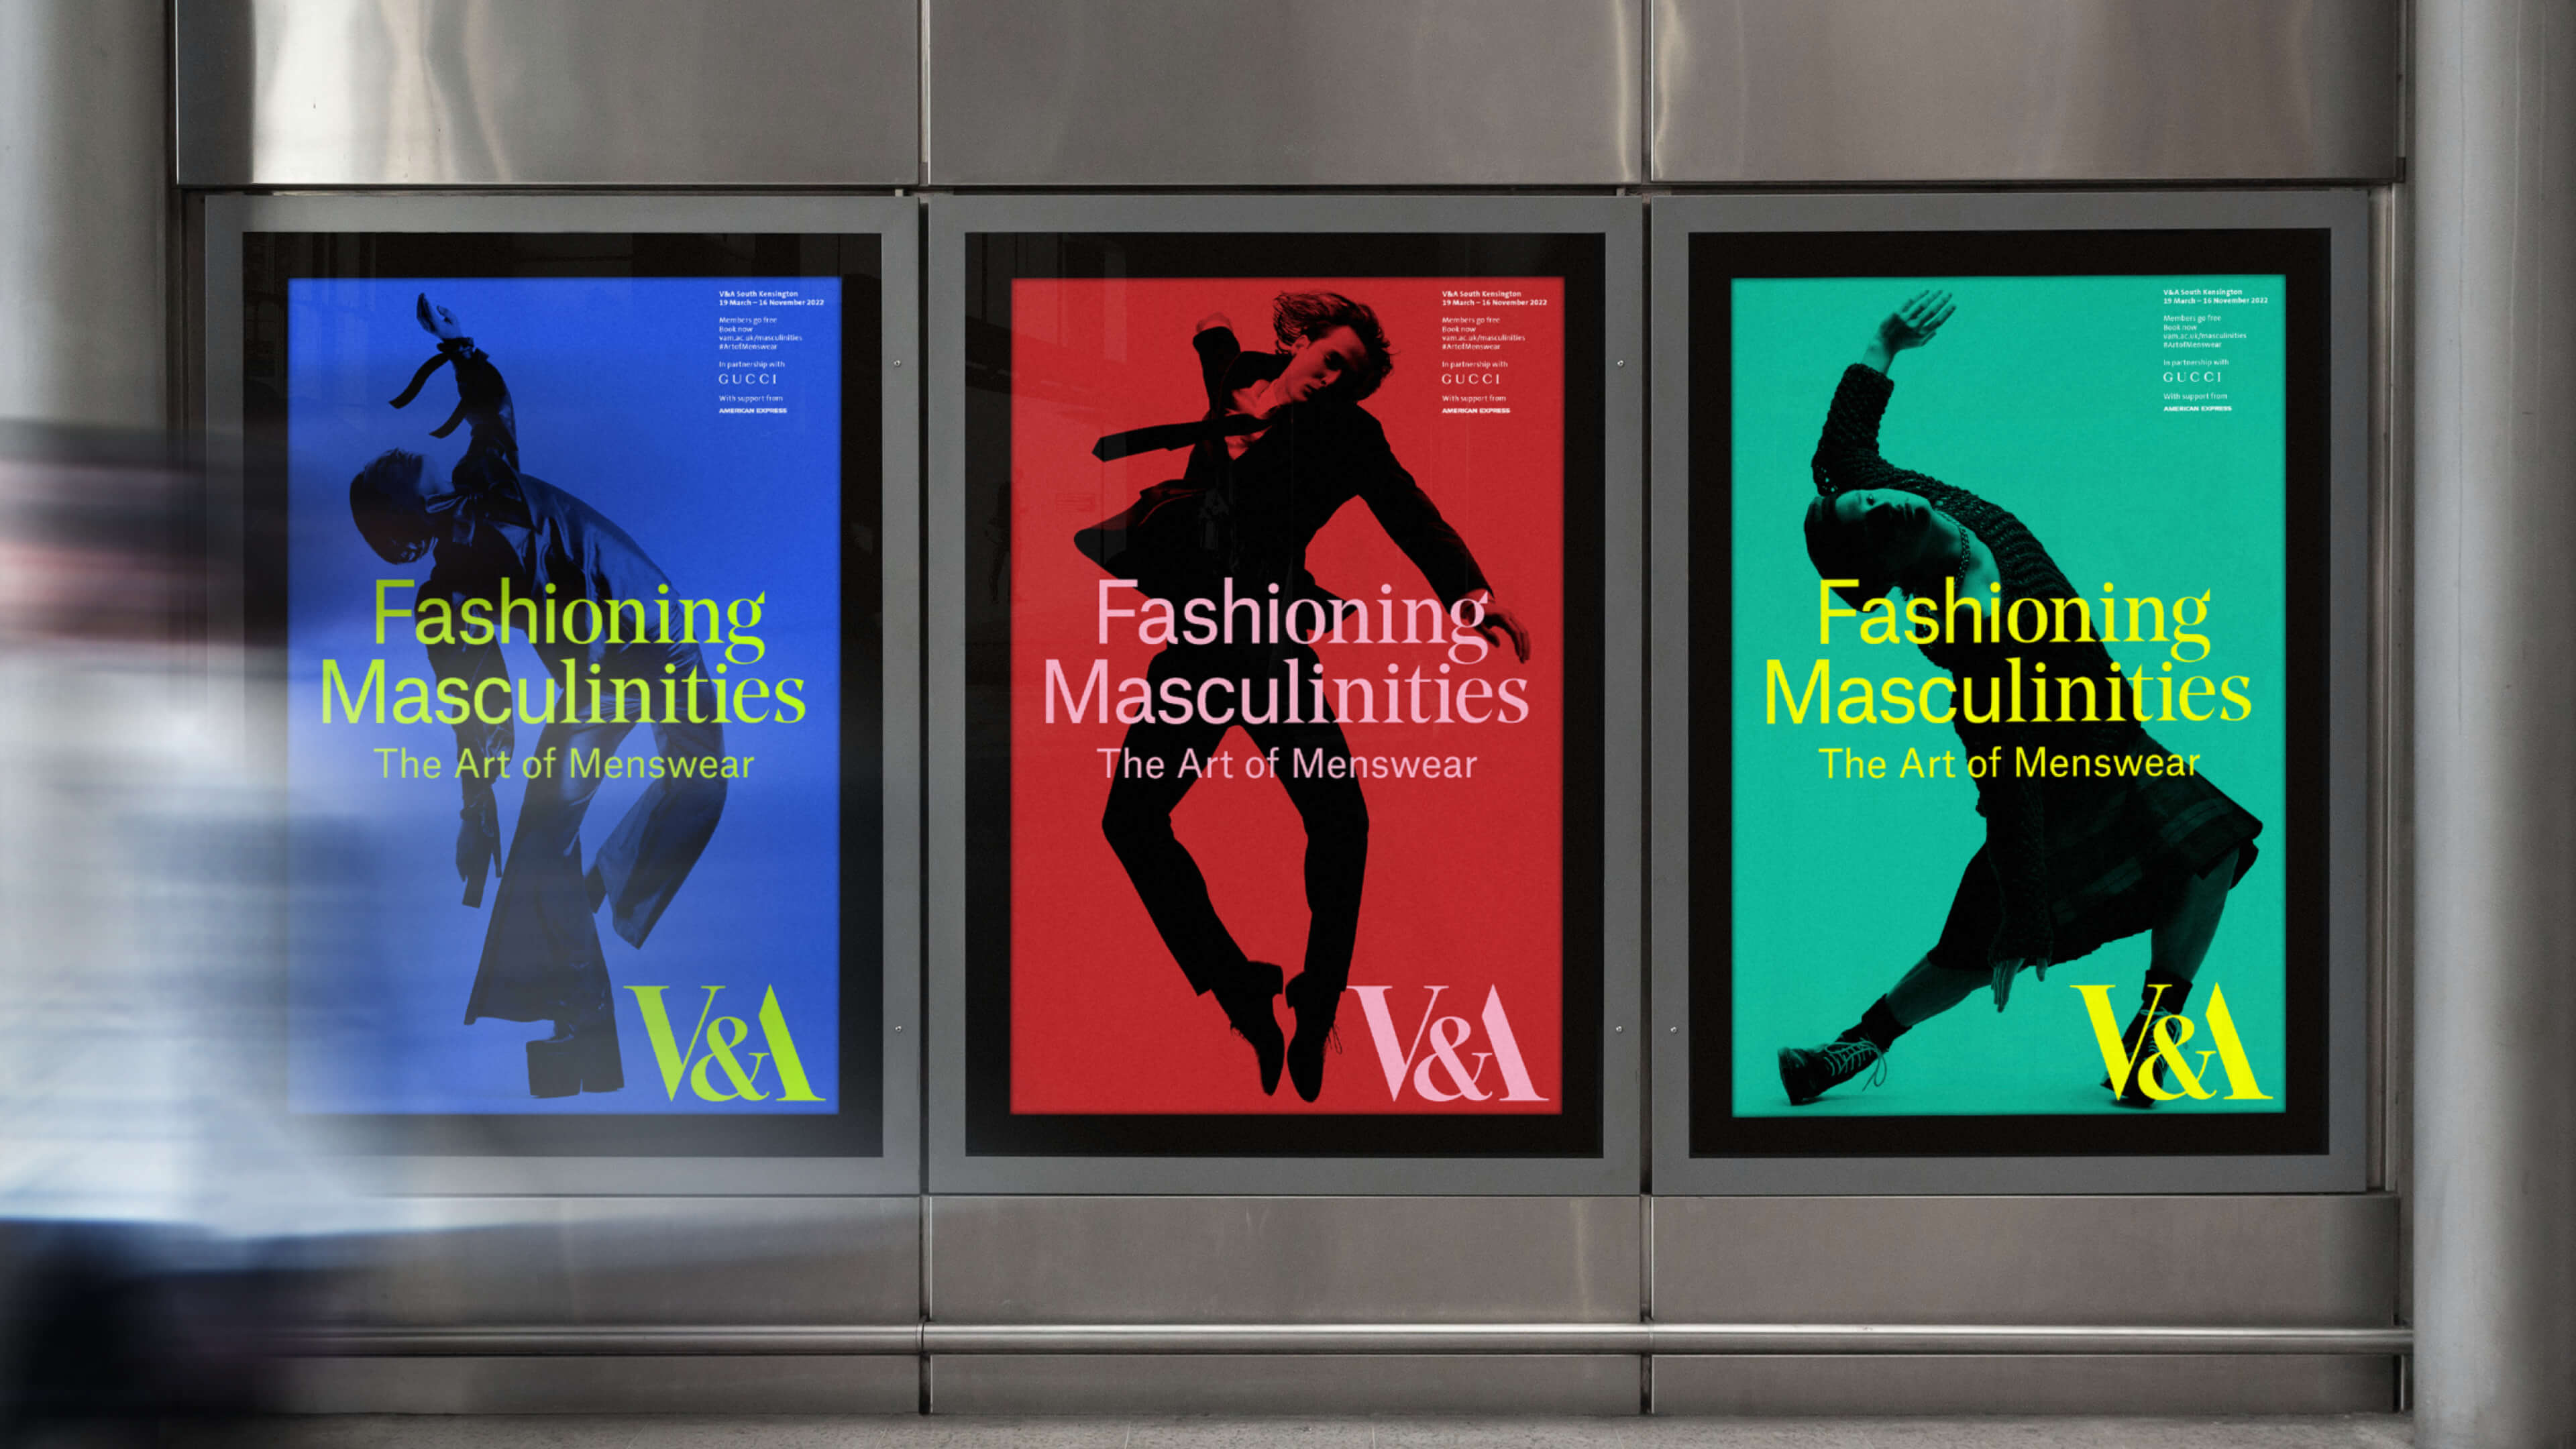 The V&A Fashioning Masculinities Campaign By Hingston Studio, In